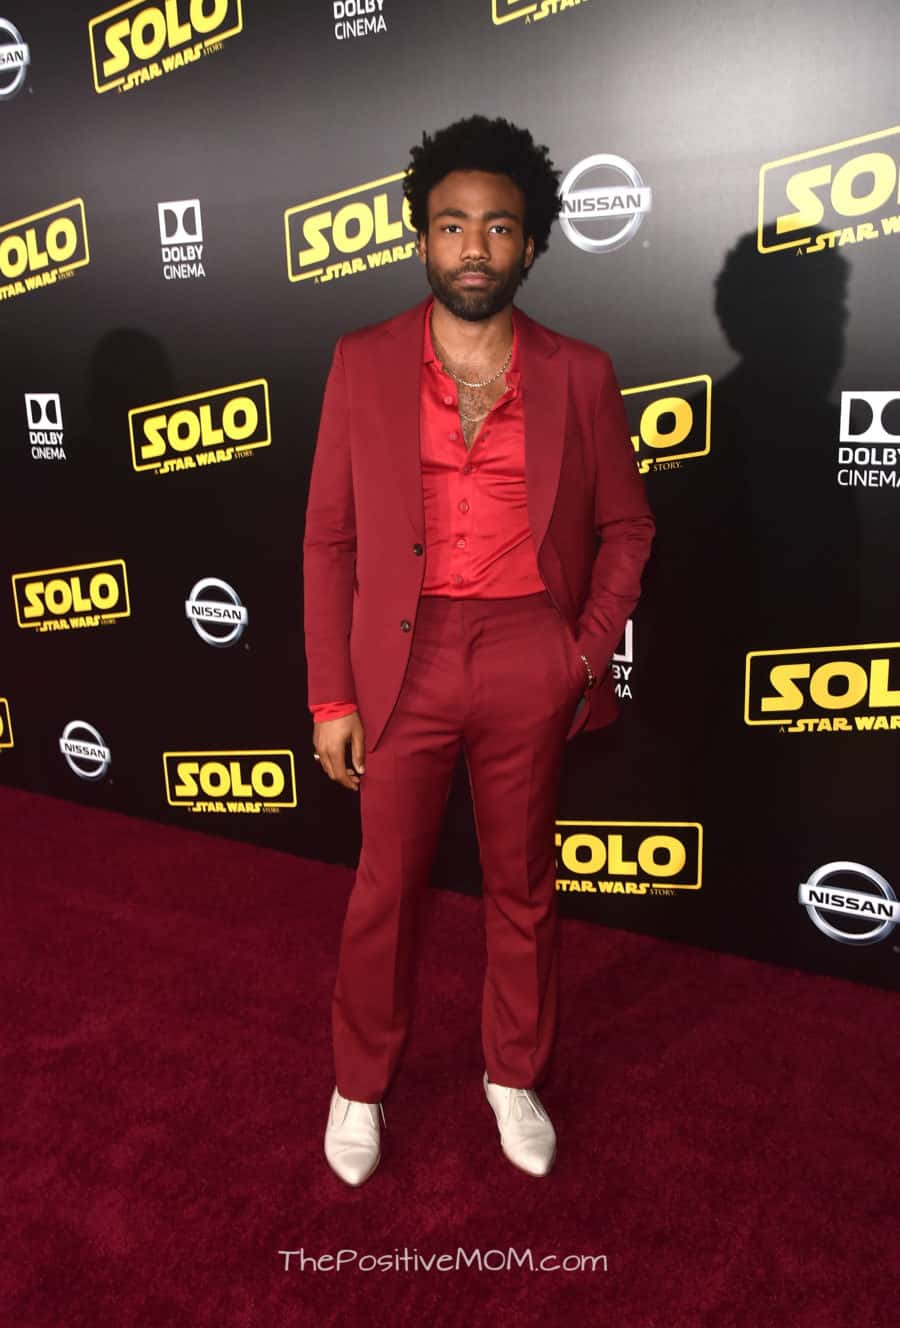 HOLLYWOOD, CA - MAY 10: Actor Donald Glover attends the world premiere of “Solo: A Star Wars Story” in Hollywood on May 10, 2018. (Photo by Alberto E. Rodriguez/Getty Images for Disney) *** Local Caption *** Donald GLover